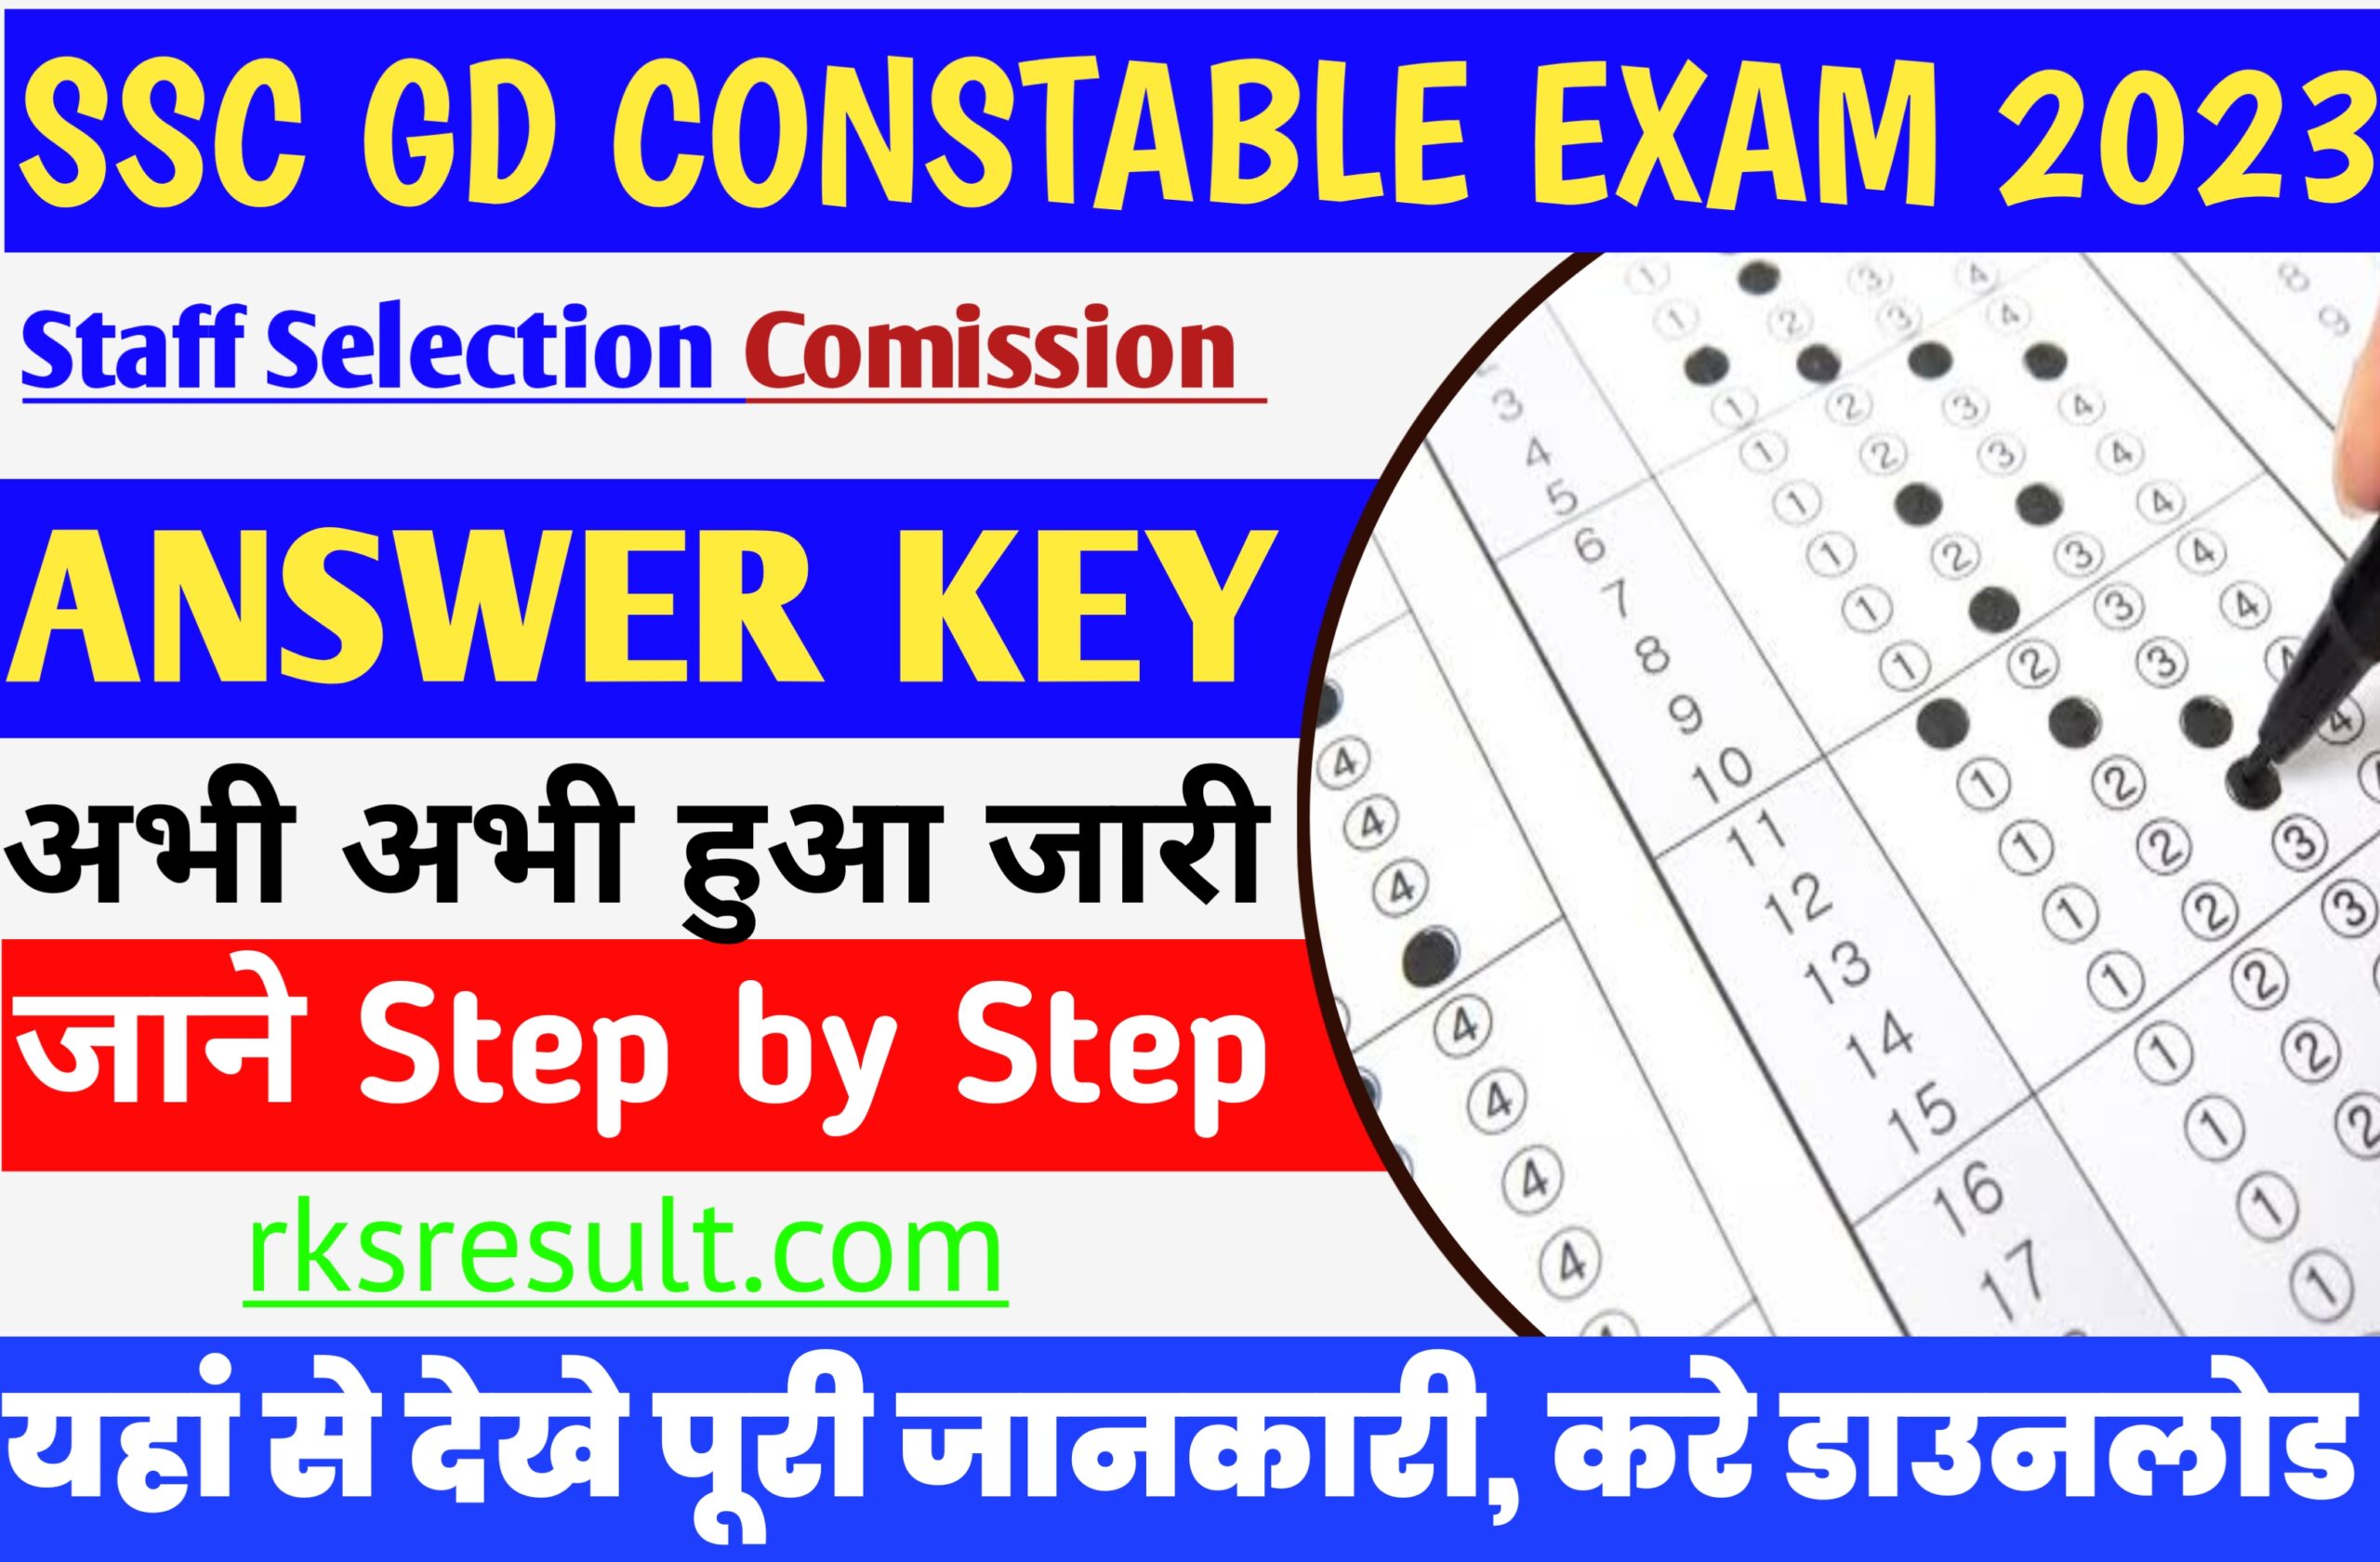 SSC GD CONSTABLE Answer Key 2023